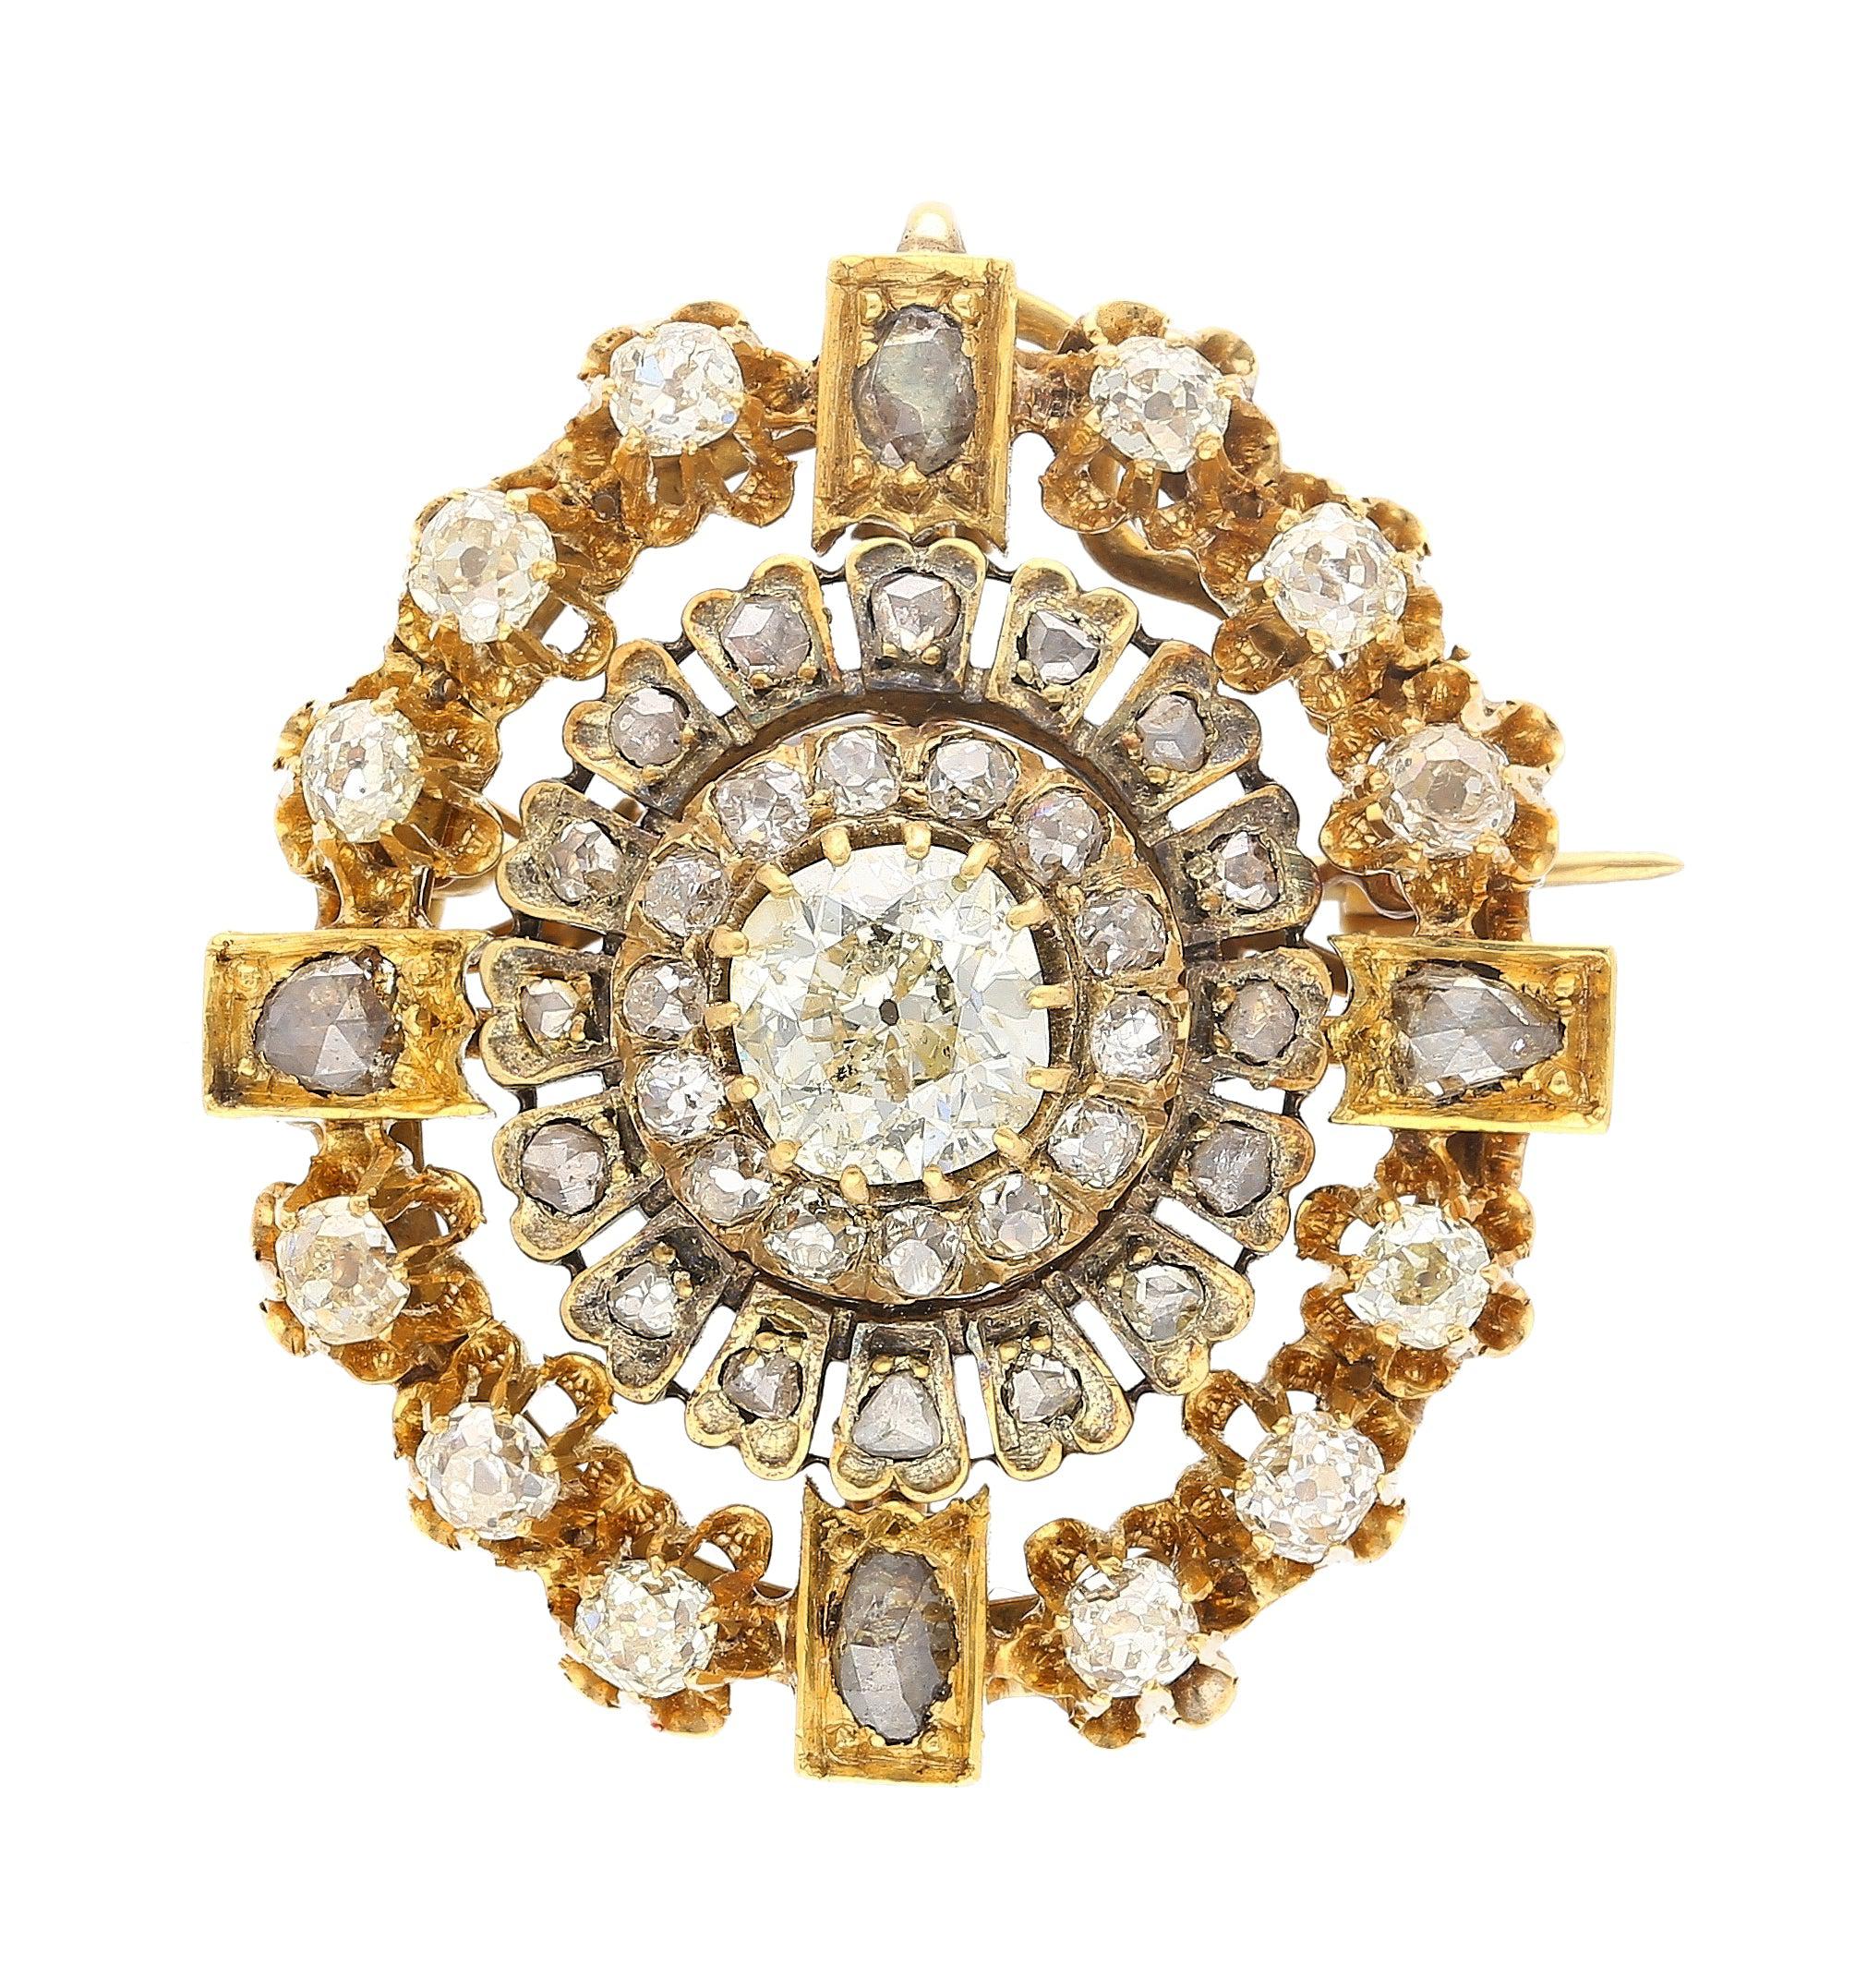 Antique-Victorian-Late-1800s-6_72-Carat-Total-Mixed-Old-Euro-Cut-Diamond-Brooch-Brooches-Lapel-Pins.jpg